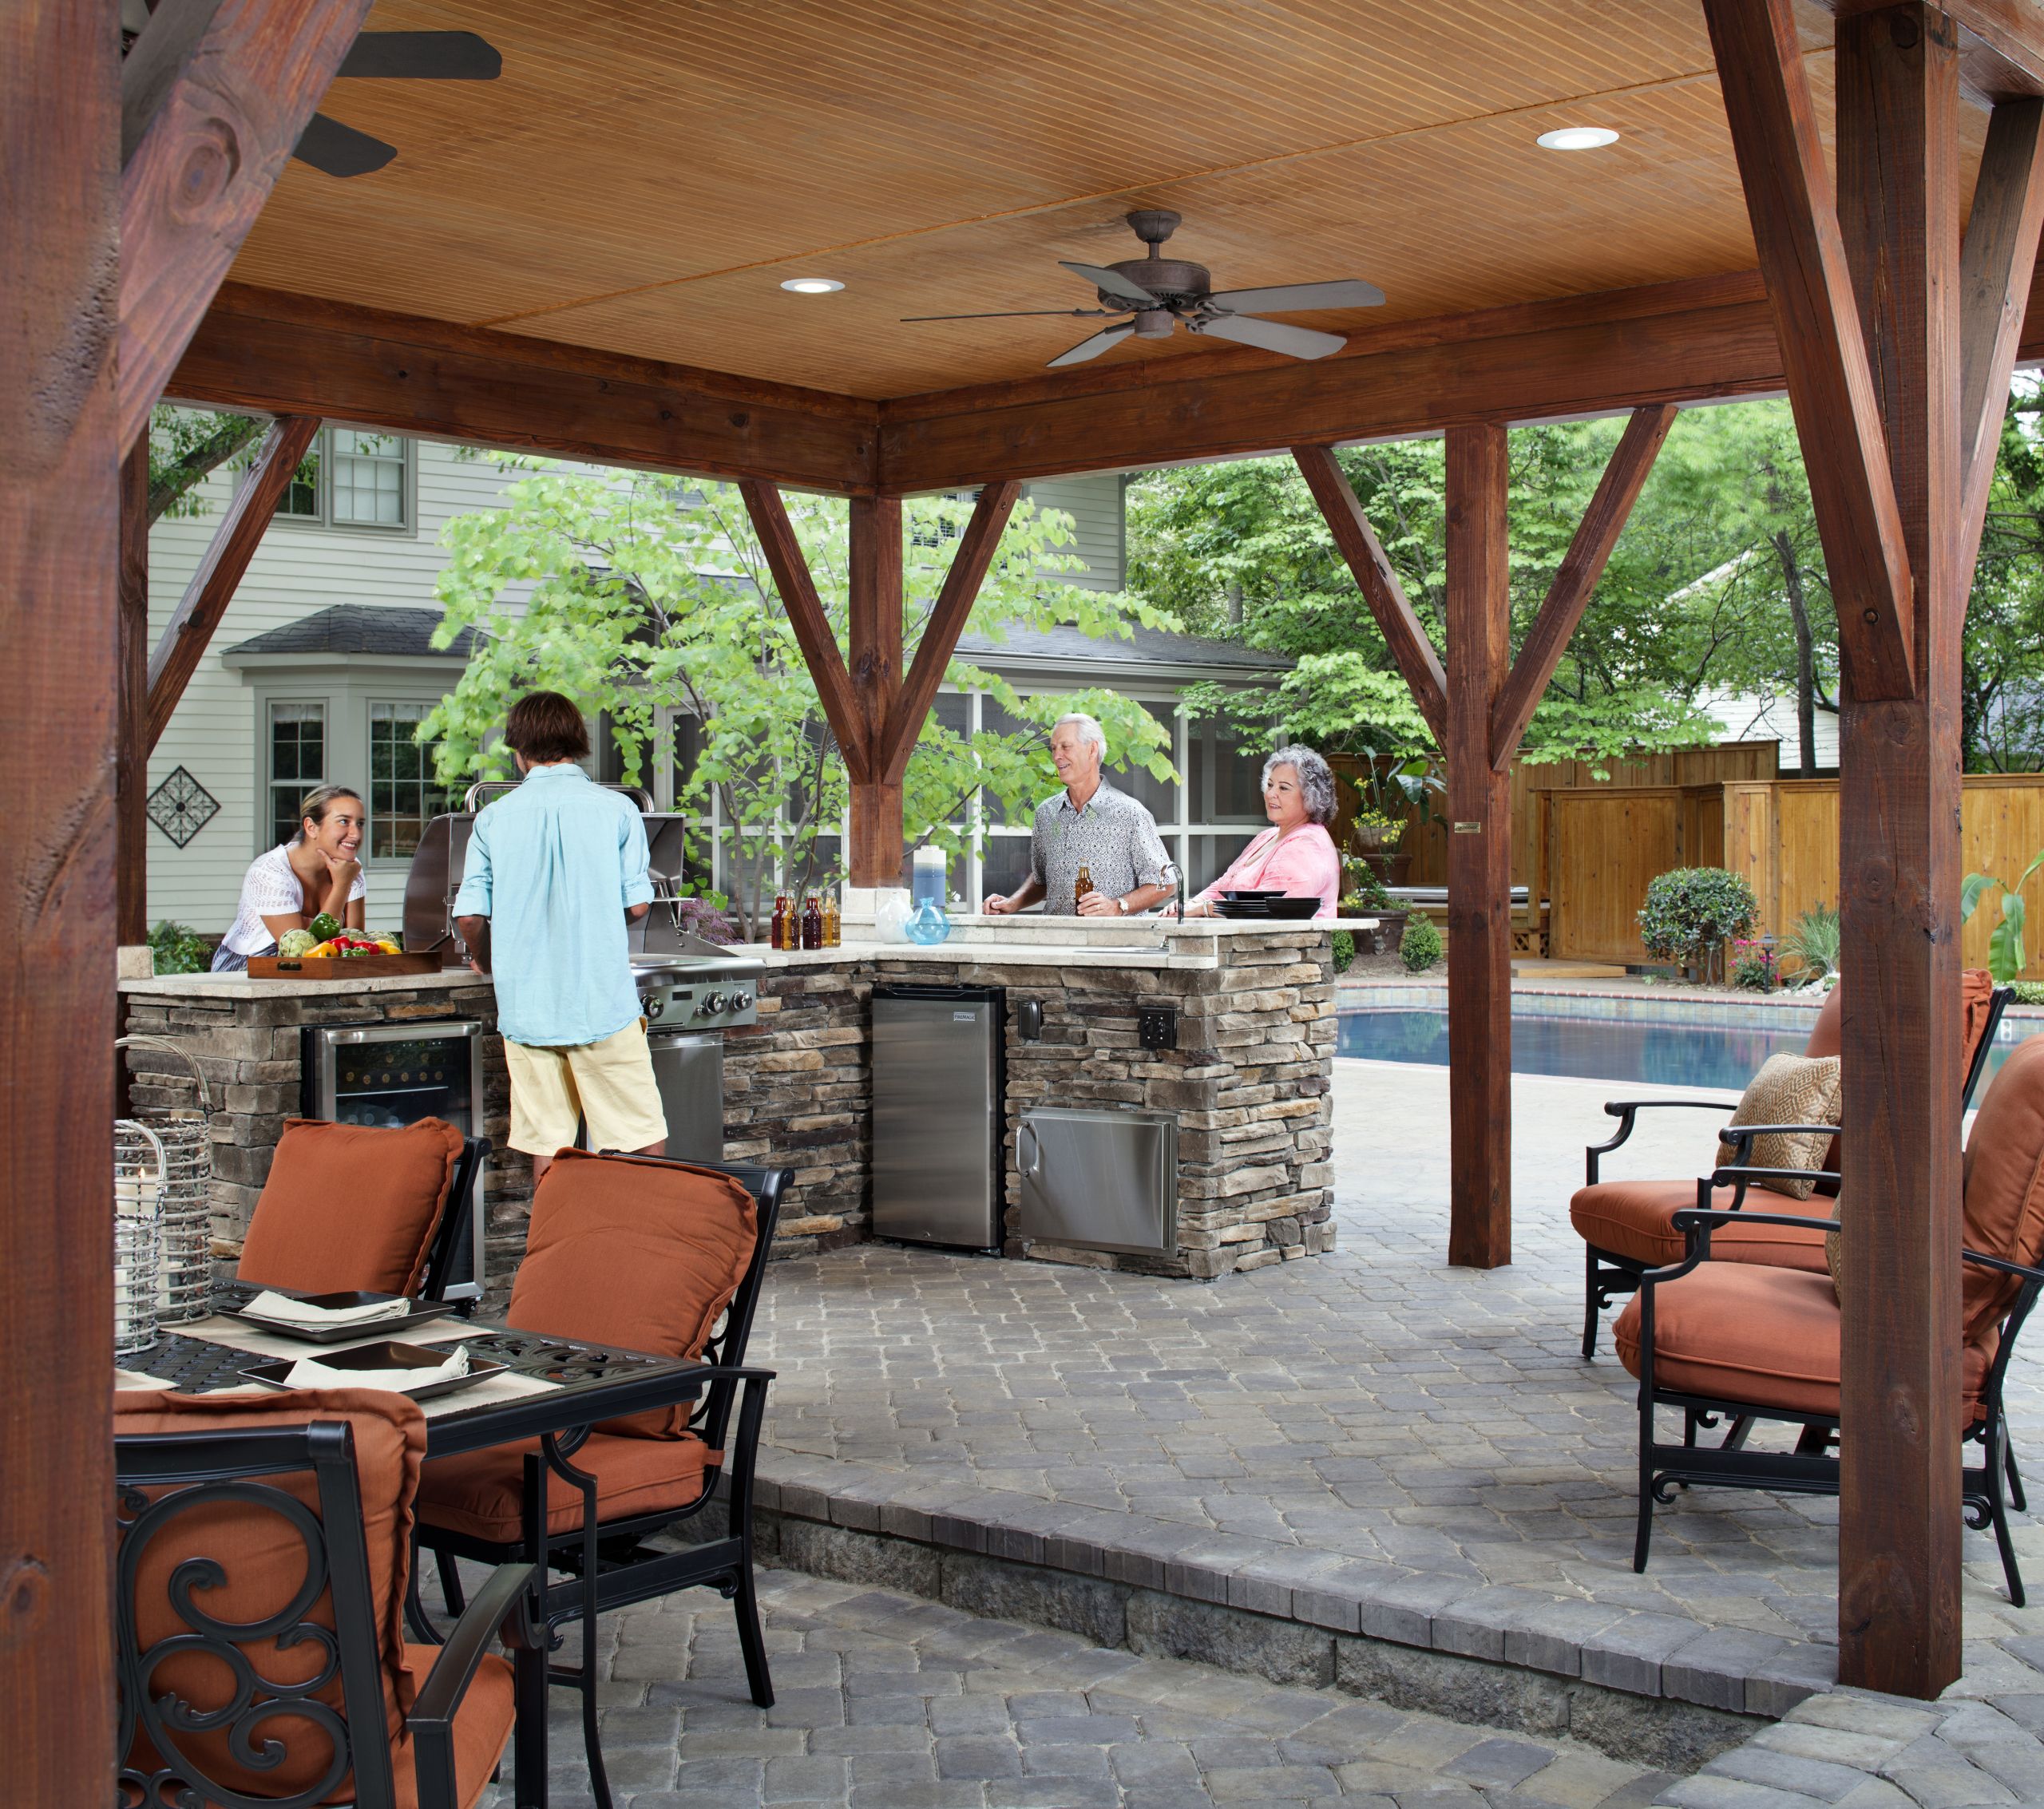 Covered Outdoor Kitchen Plans
 Columbia SC outdoor kitchens